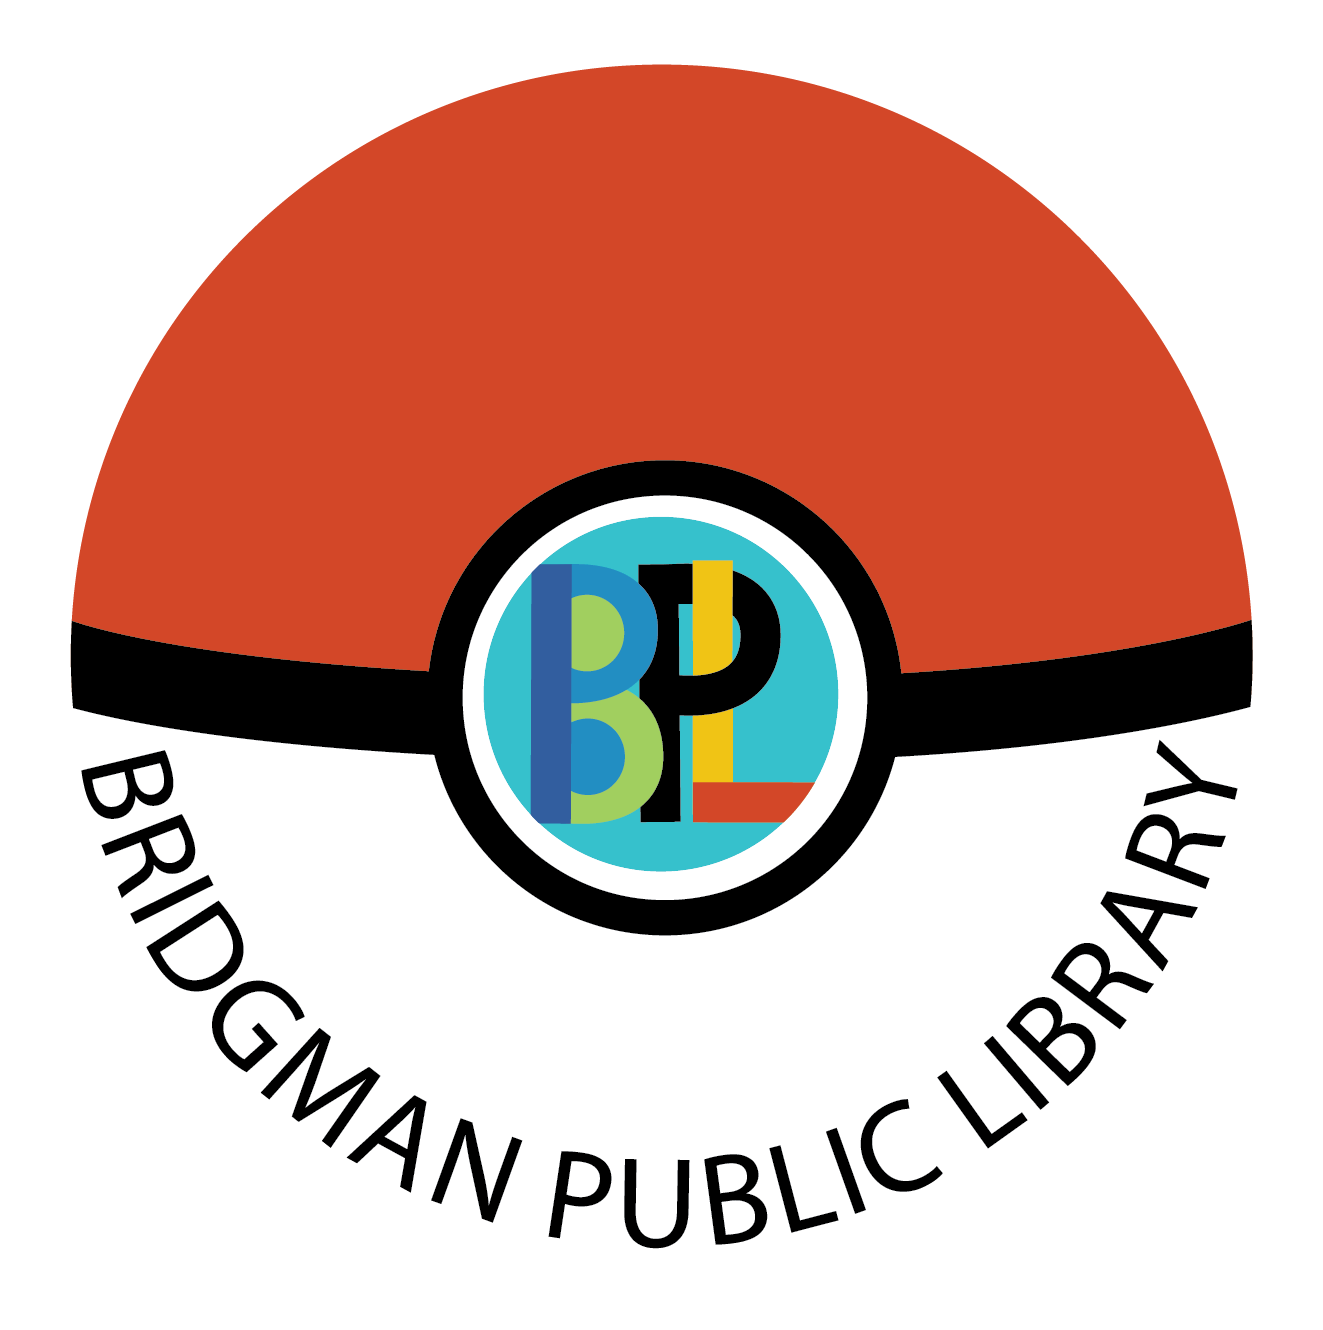 A link to register for the Pokemon Card League.